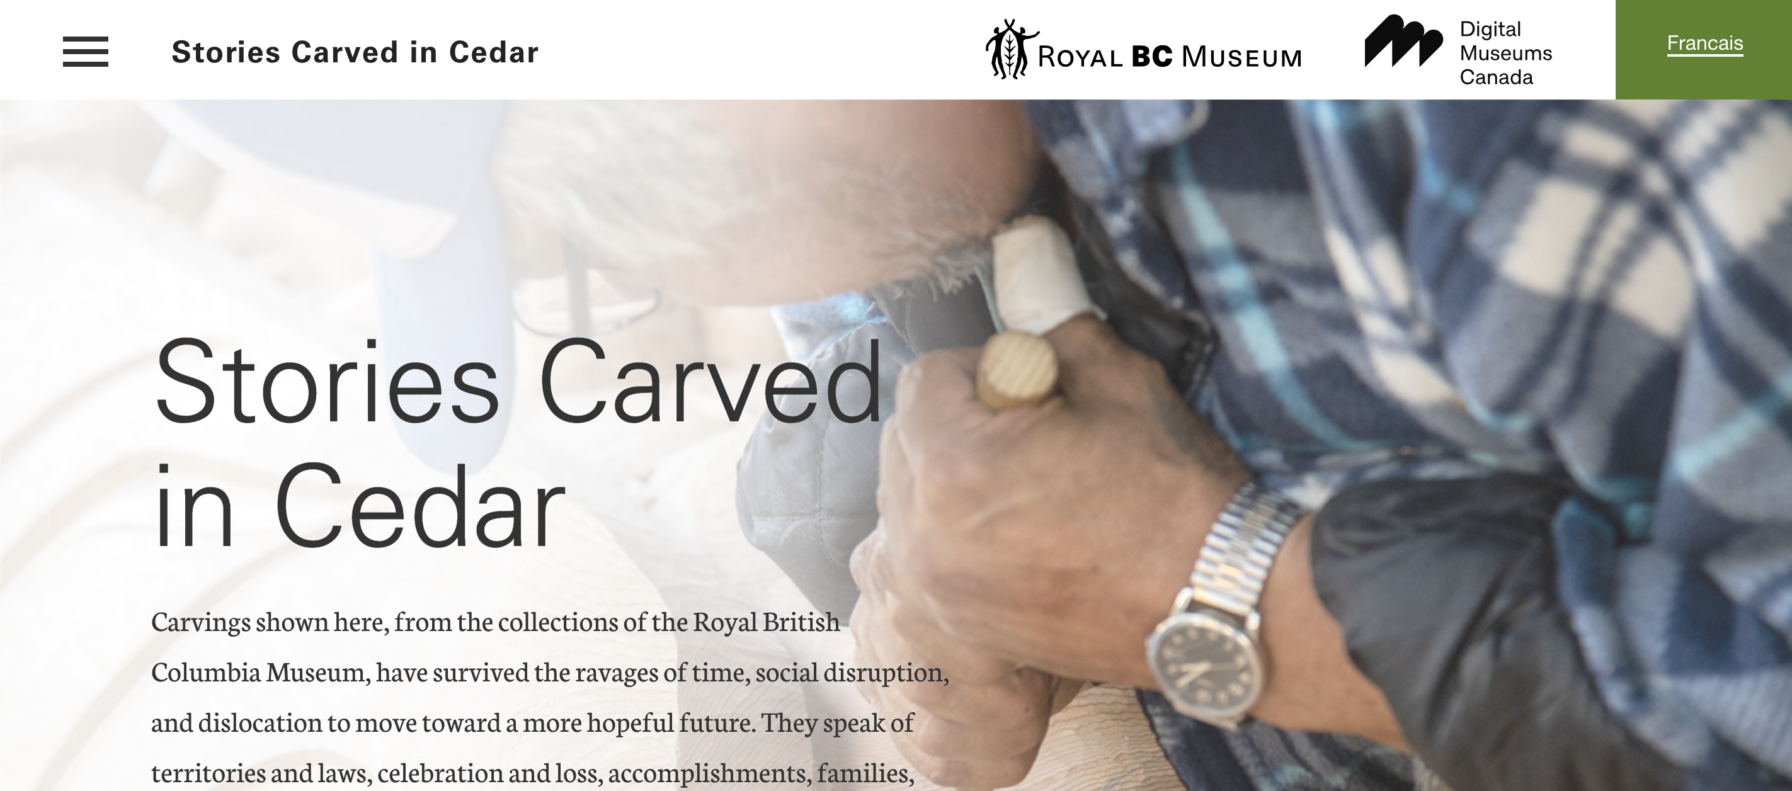 Royal BC Museum: Stories Carved in Cedar